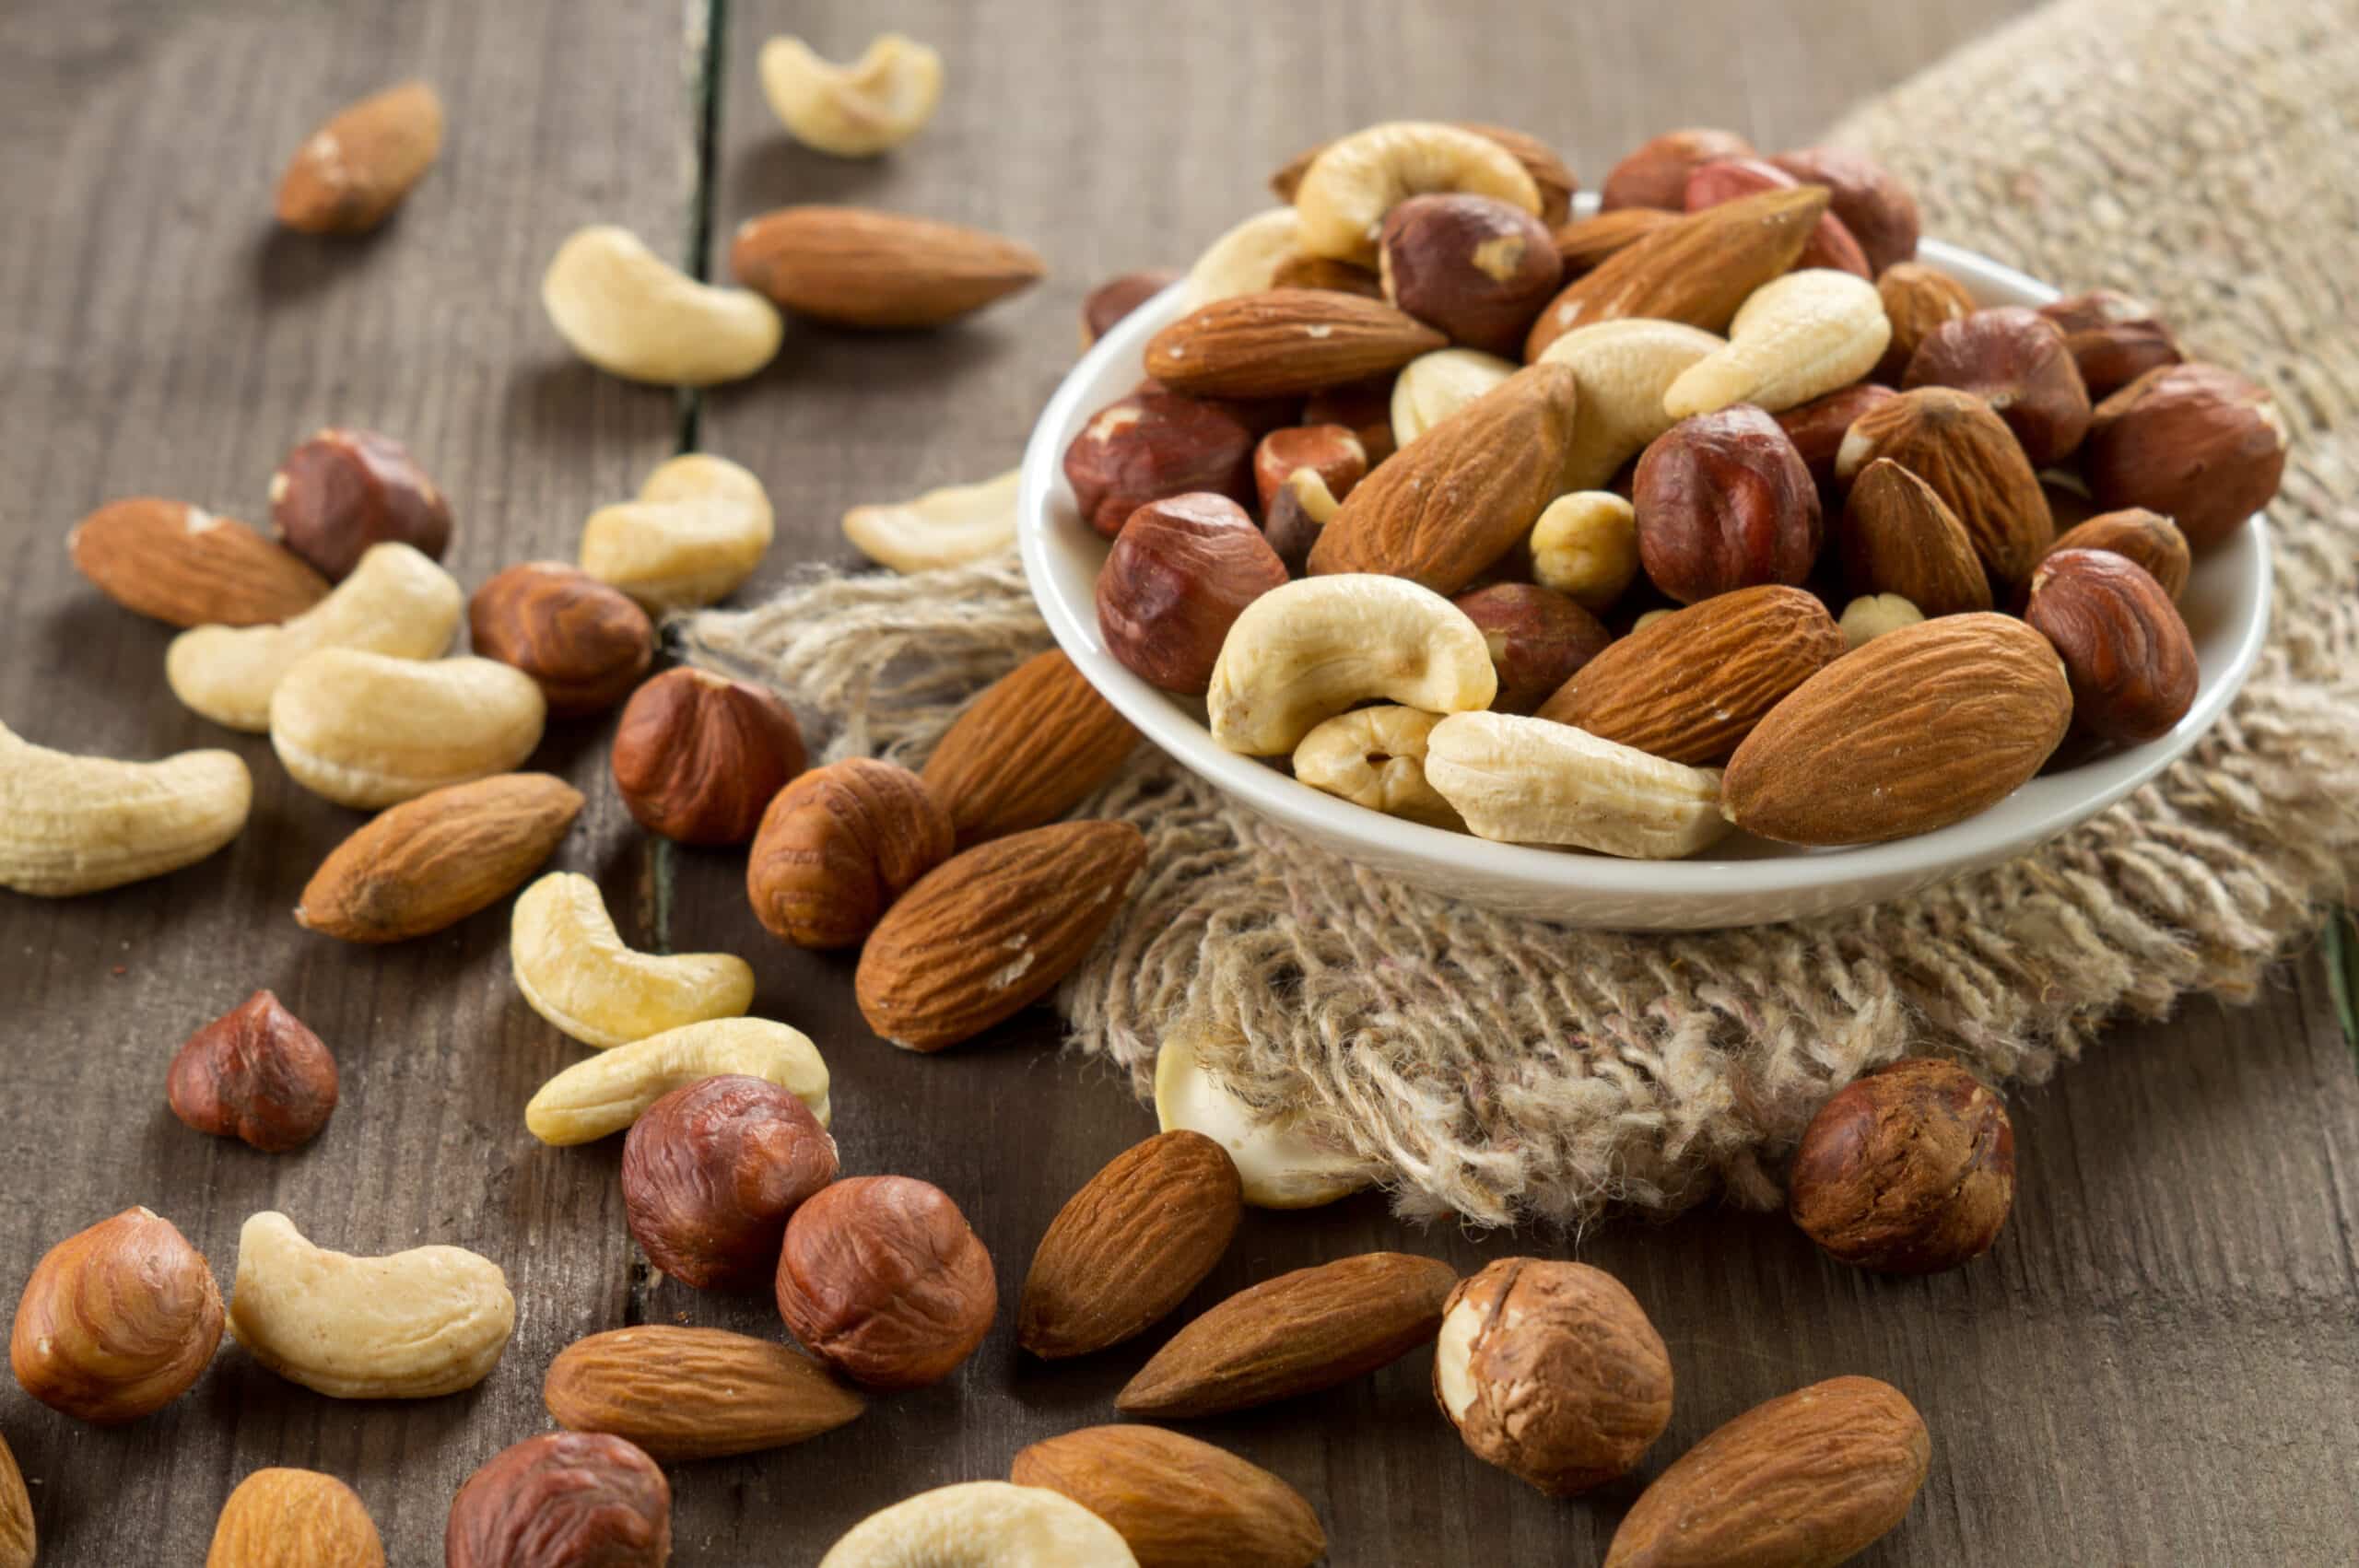 Nuts May Help To Reduce Metabolic Syndrome